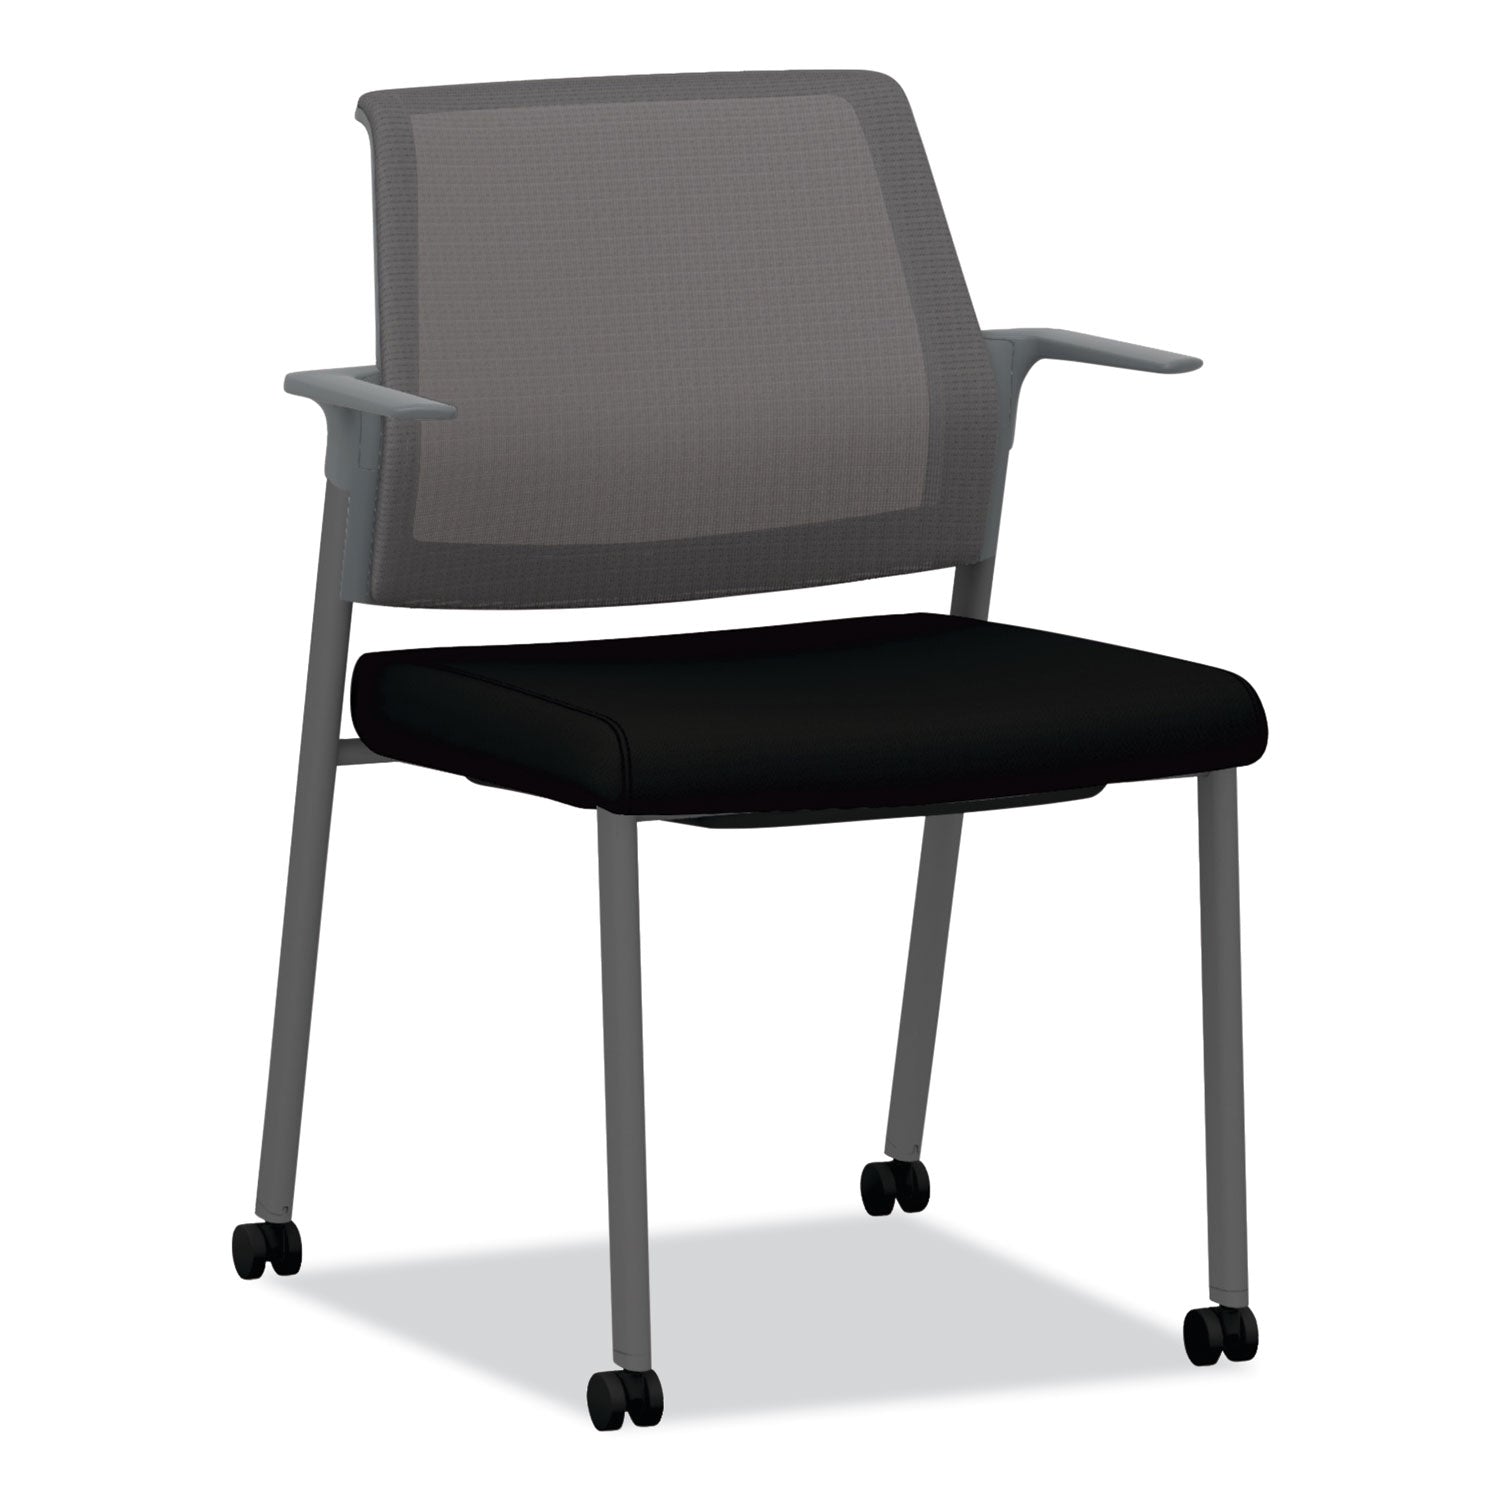 cipher-mesh-back-guest-chair-2425-x-2413-x-335-black-seat-charcoal-back-charcoal-base-ships-in-7-10-business-days_honcfrgfhcc10p7 - 1